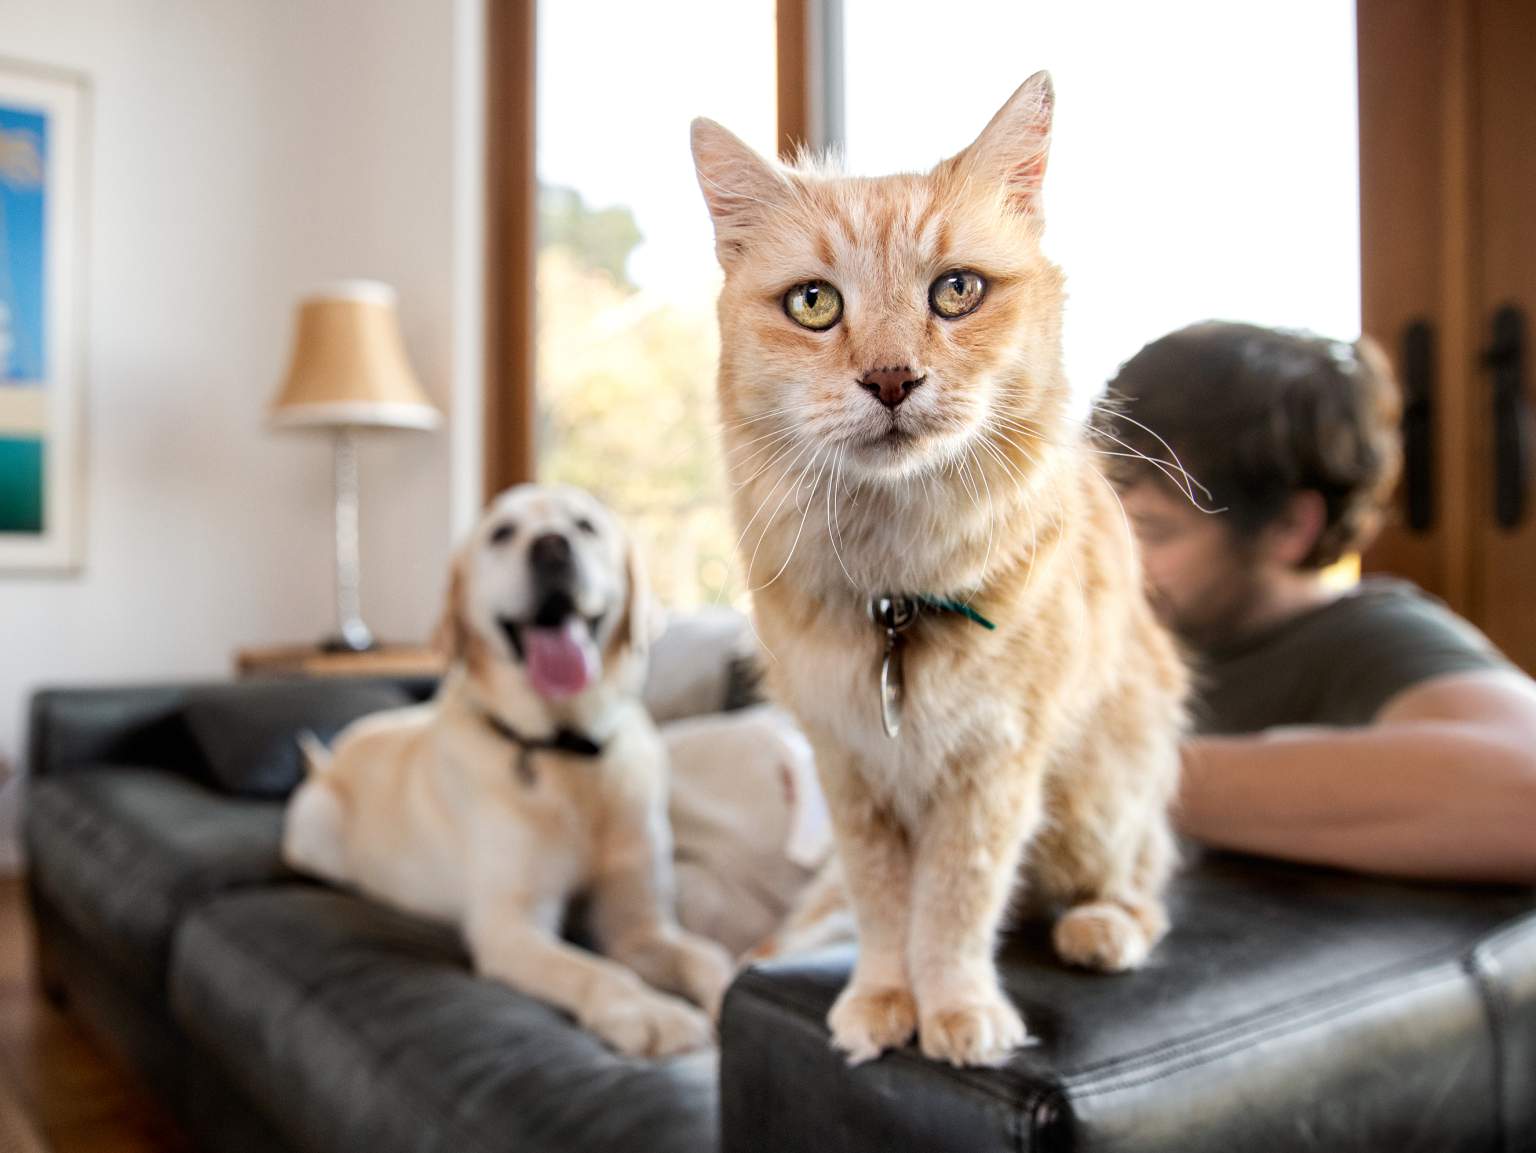 A close-up of a cat looking towards the camera while its owner and a Labrador dog are in the background